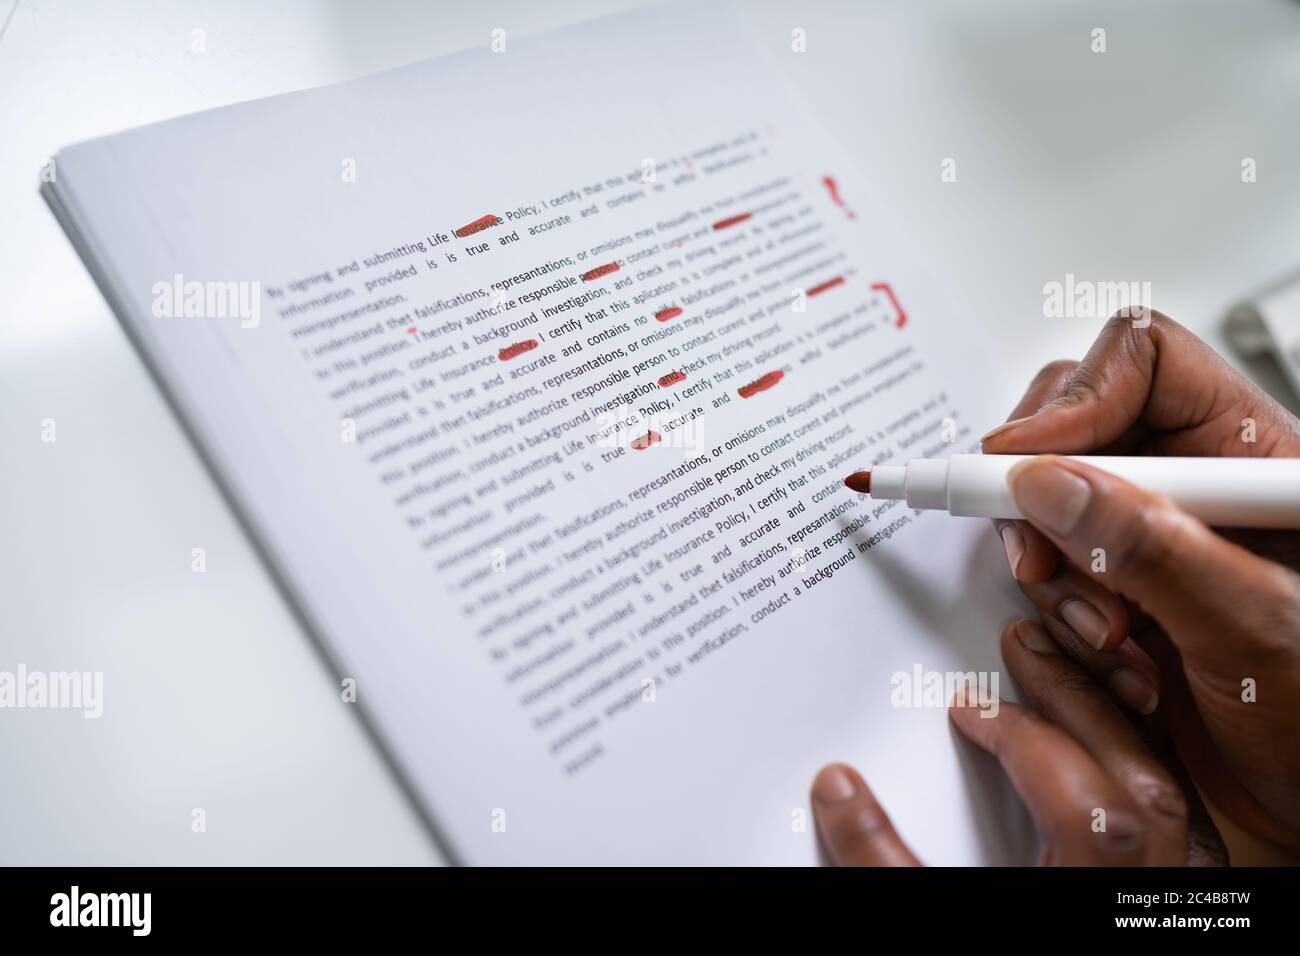 Correcting Spelling Mistake In Script And Sentence Error Proofread Stock Photo